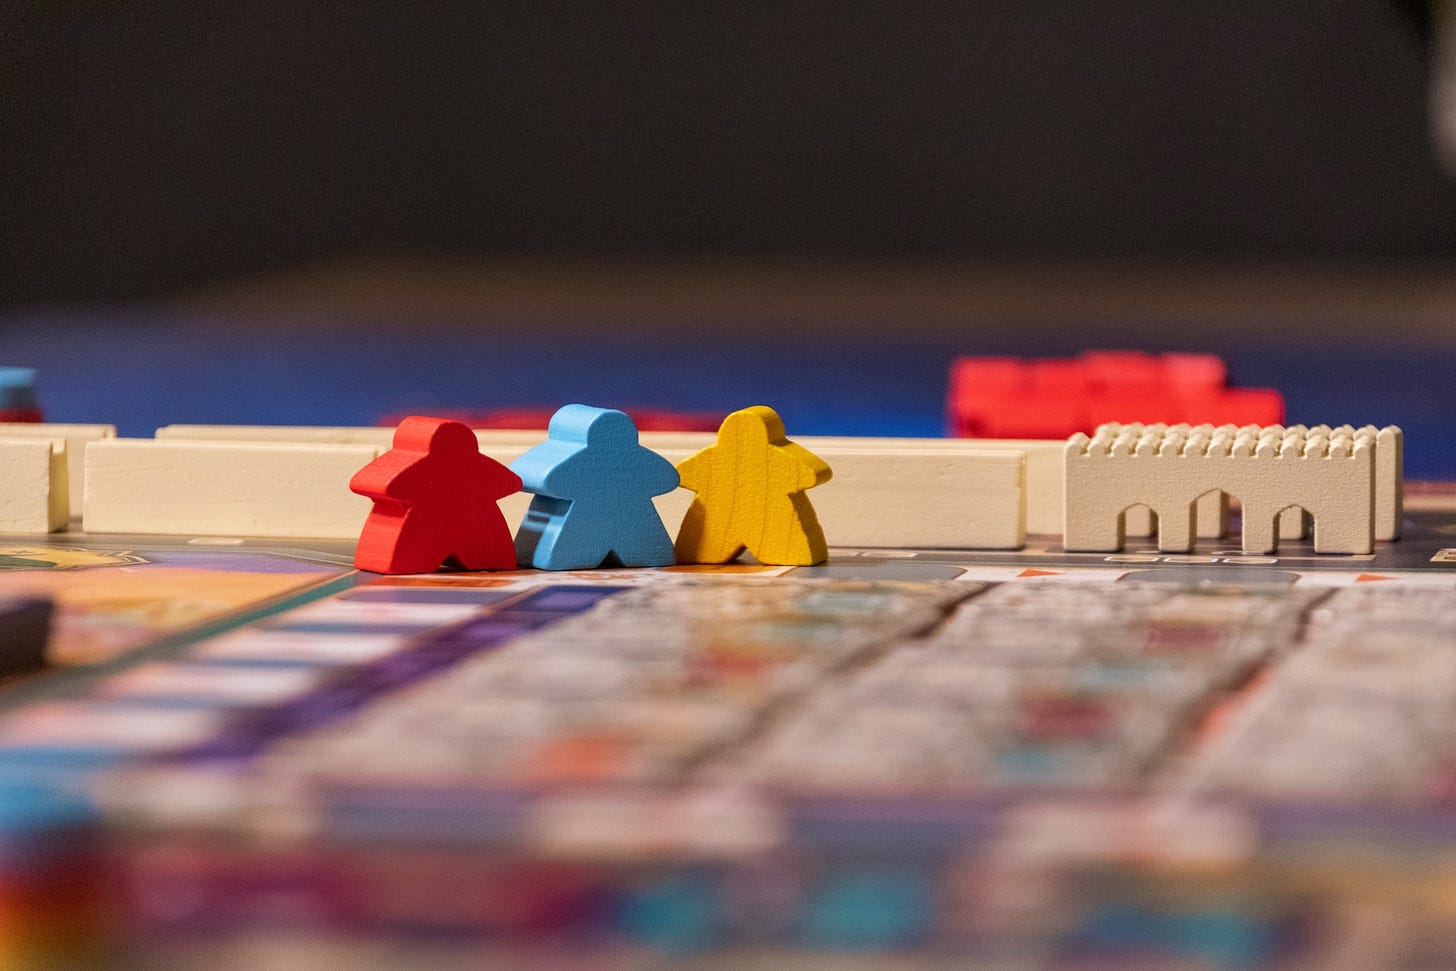 Game pieces in several colors standing on a game board.